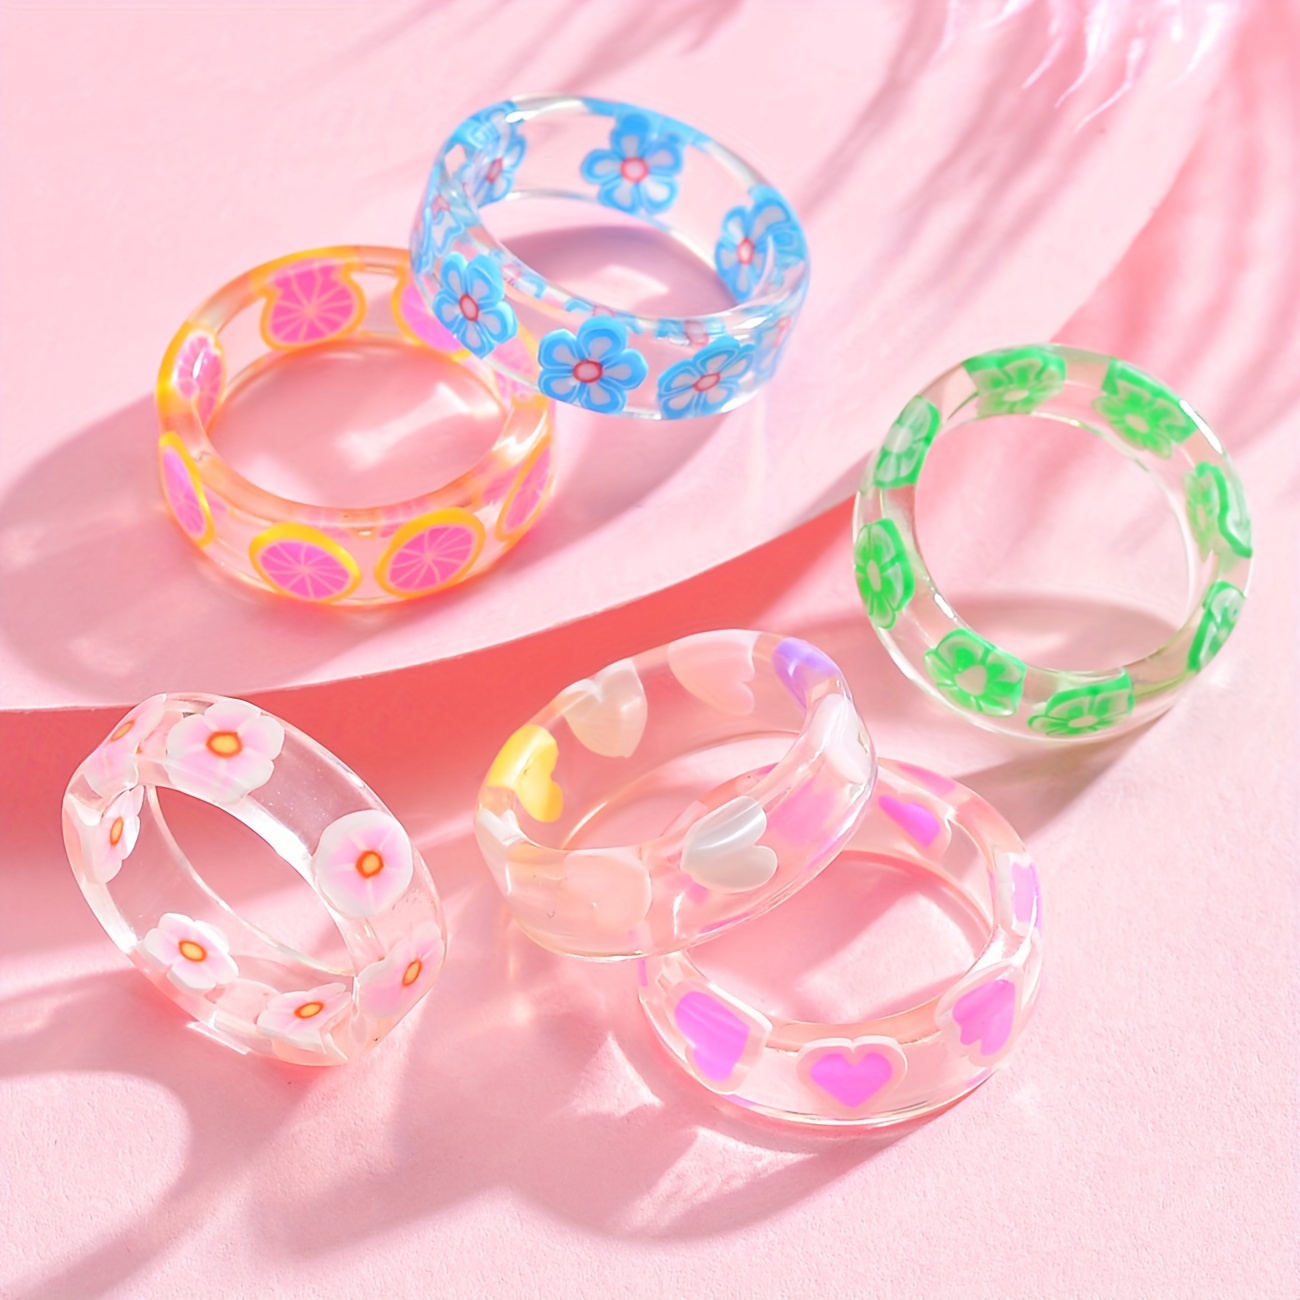 

6pcs Fashion Candy Color Transparent Acrylic Rings, Cute Ring Jewelry